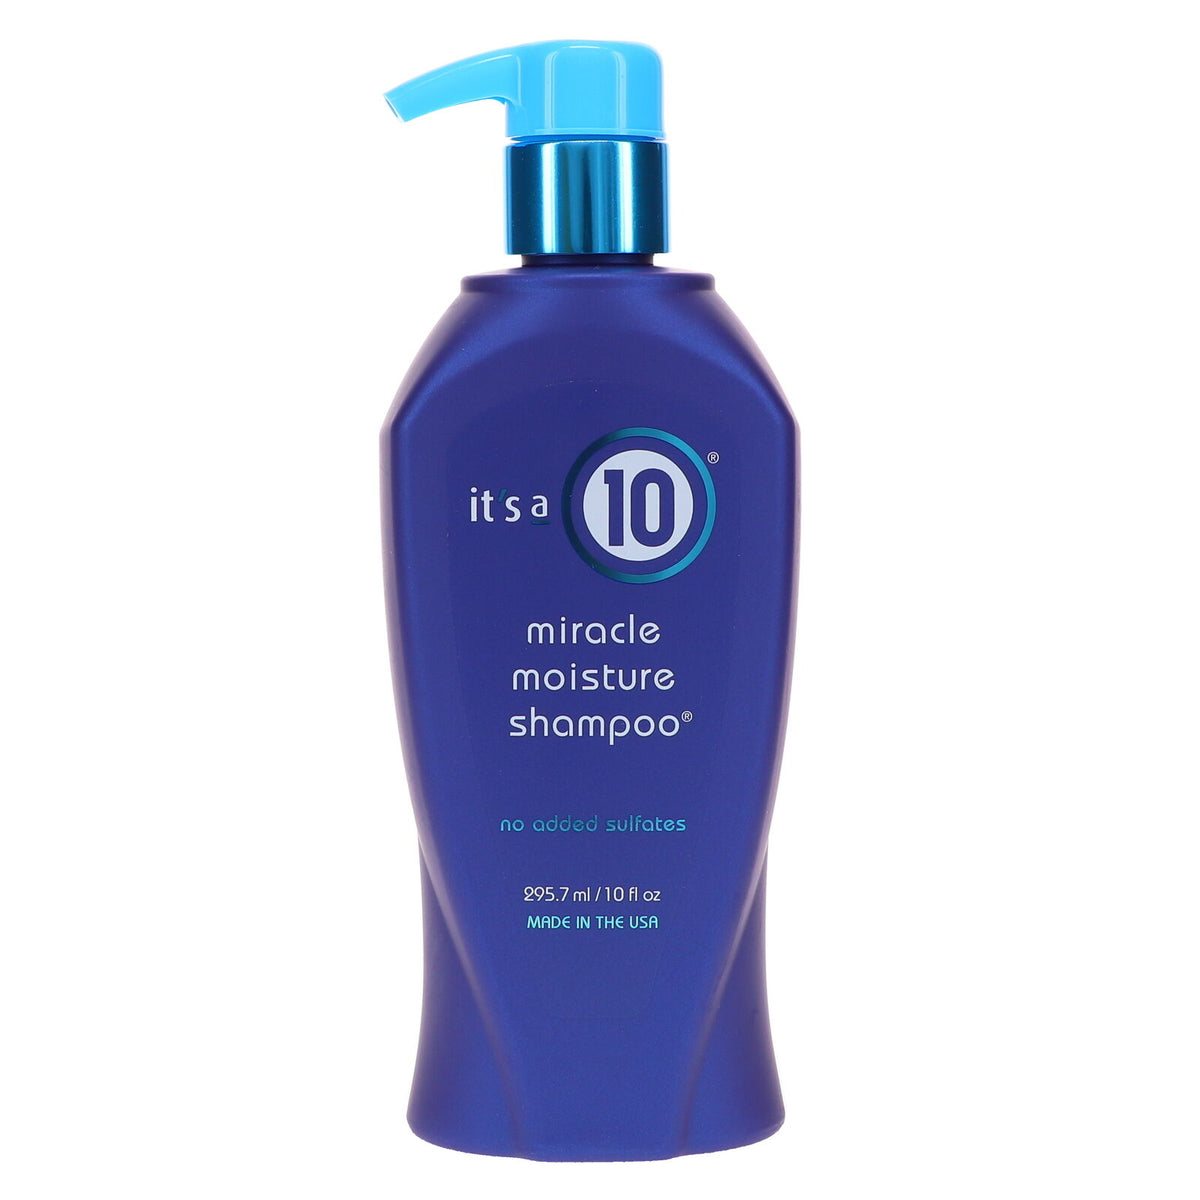 IT'S A 10 MIRACLE MOISTURE SHAMPOO NUTRITION FOR YOUR HAIR SULFATE FREE 10 OZ